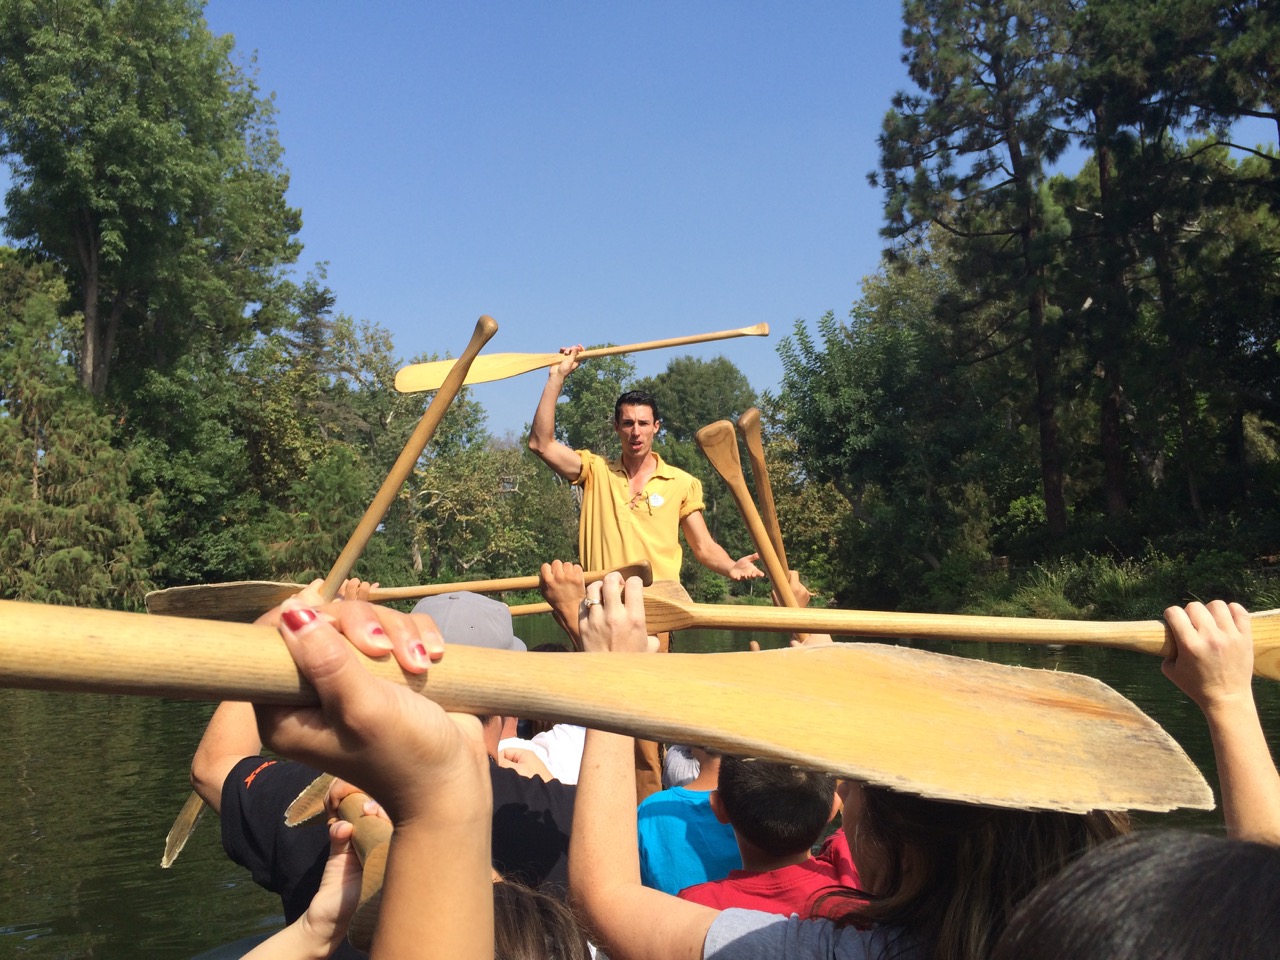 A cast member leads the instruction for canoeing around the Rivers of America at Disneyland. Photo by J. Jeff Kober.